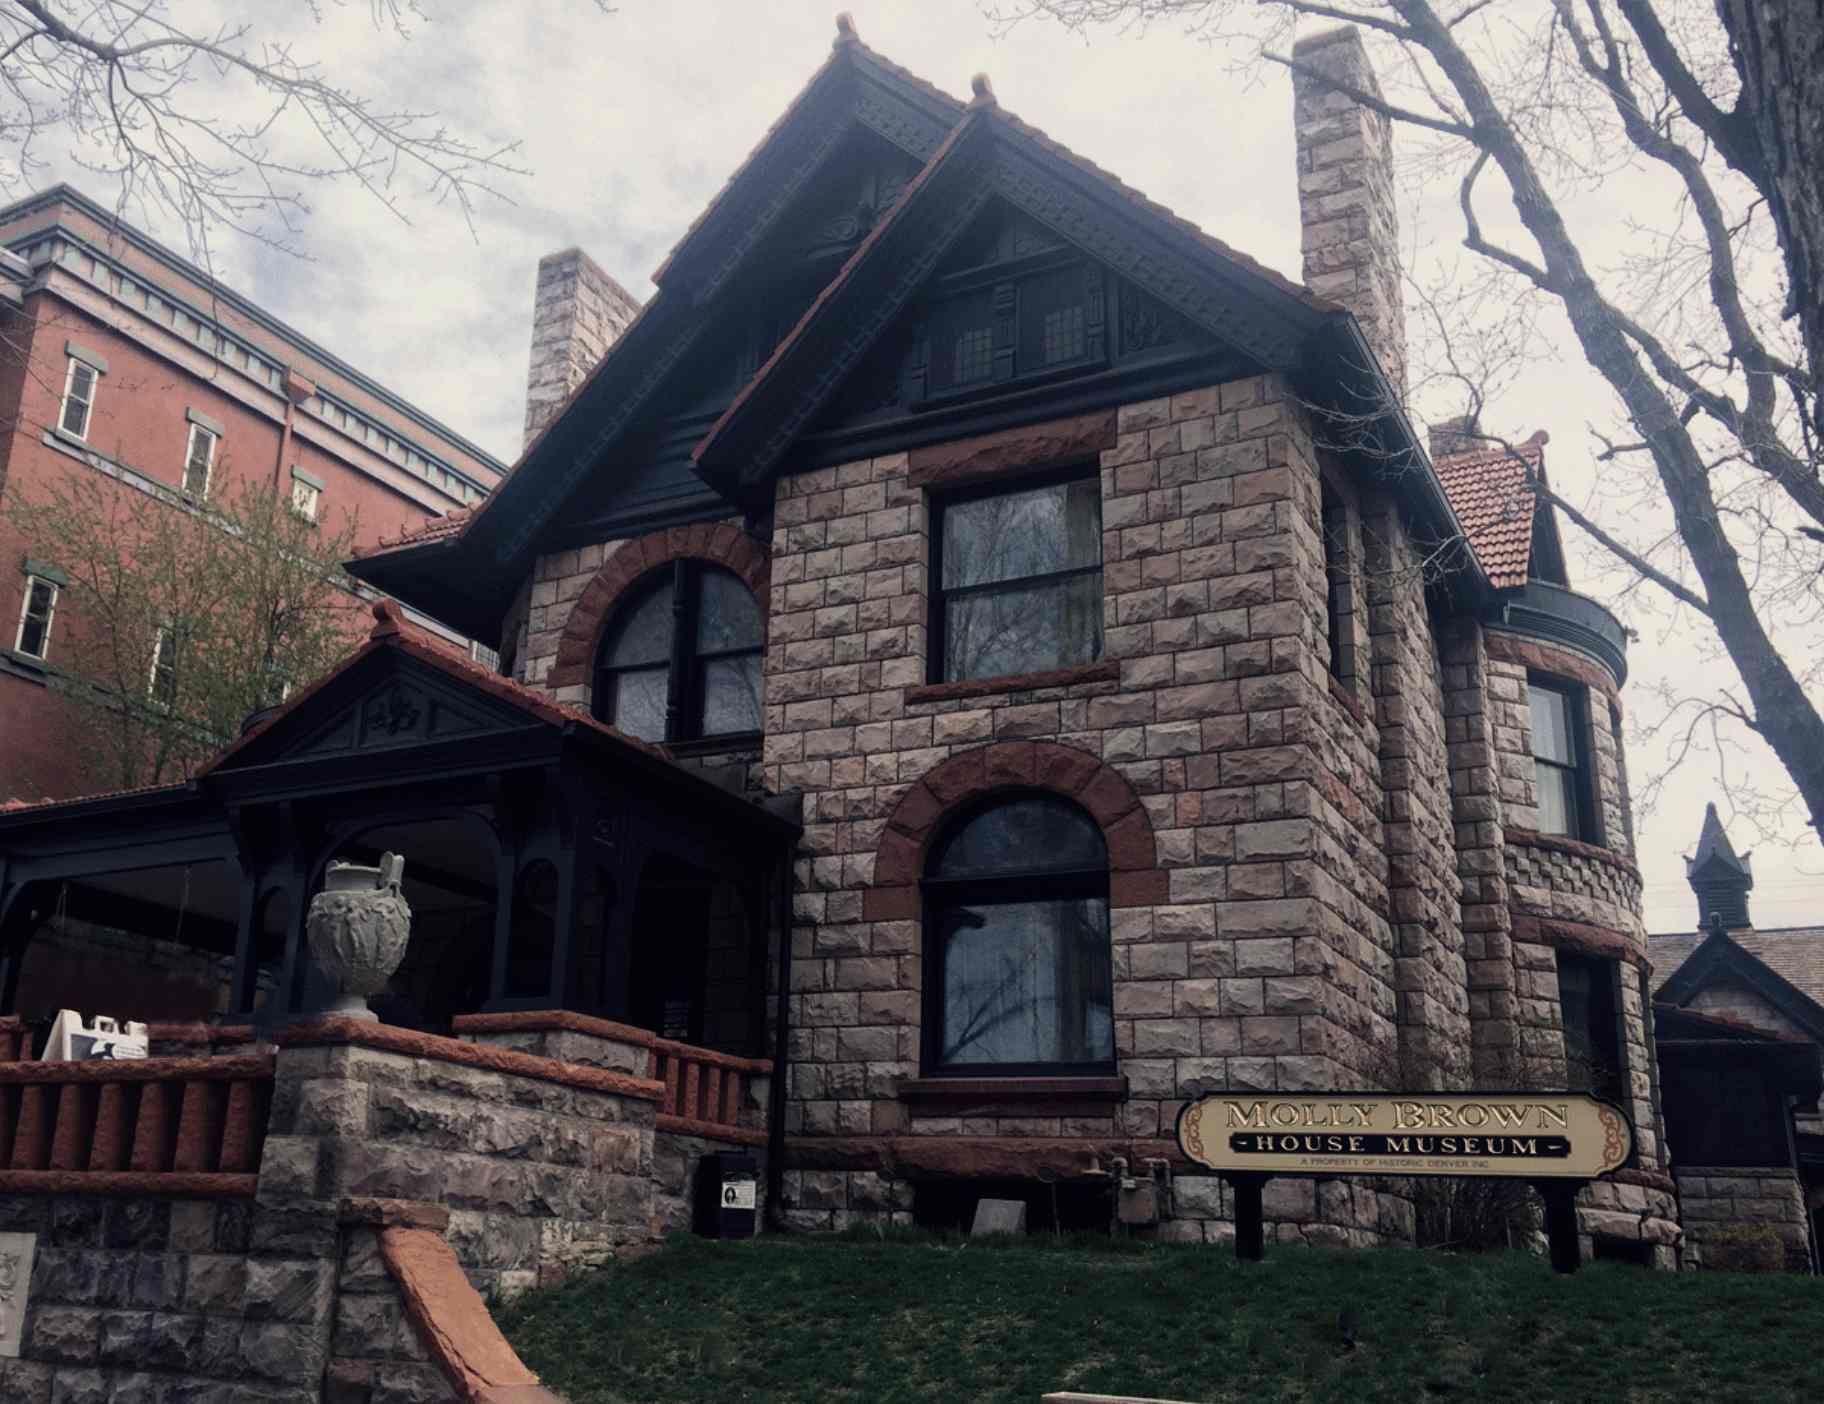 The Molly Brown House Museum